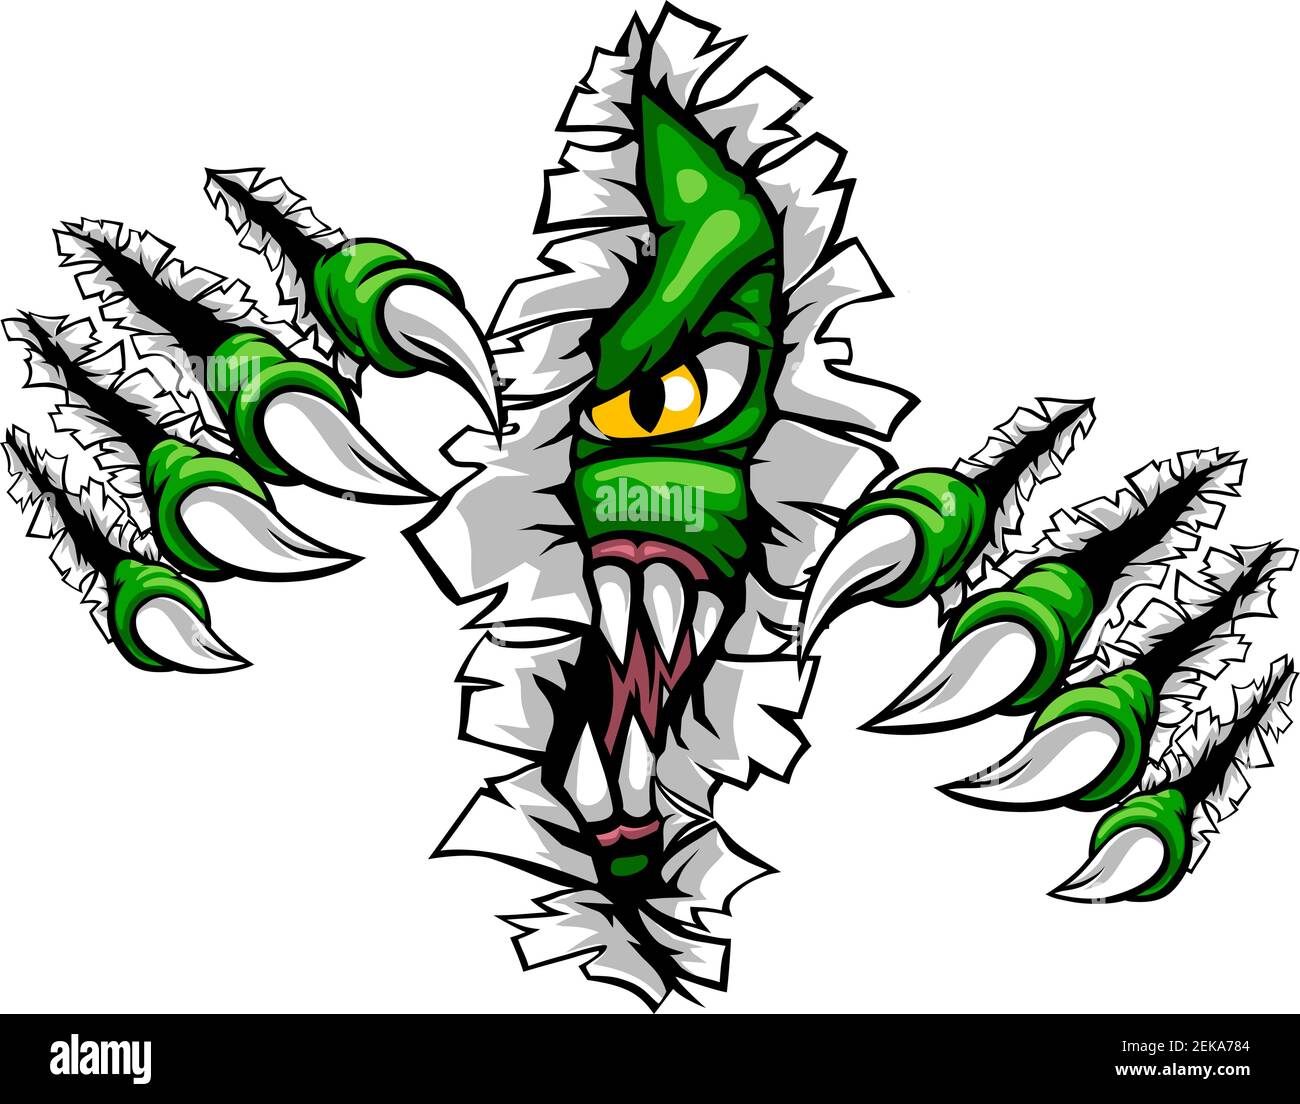 Monster With Talon Claw Tearing A Rip Through Wall Stock Vector